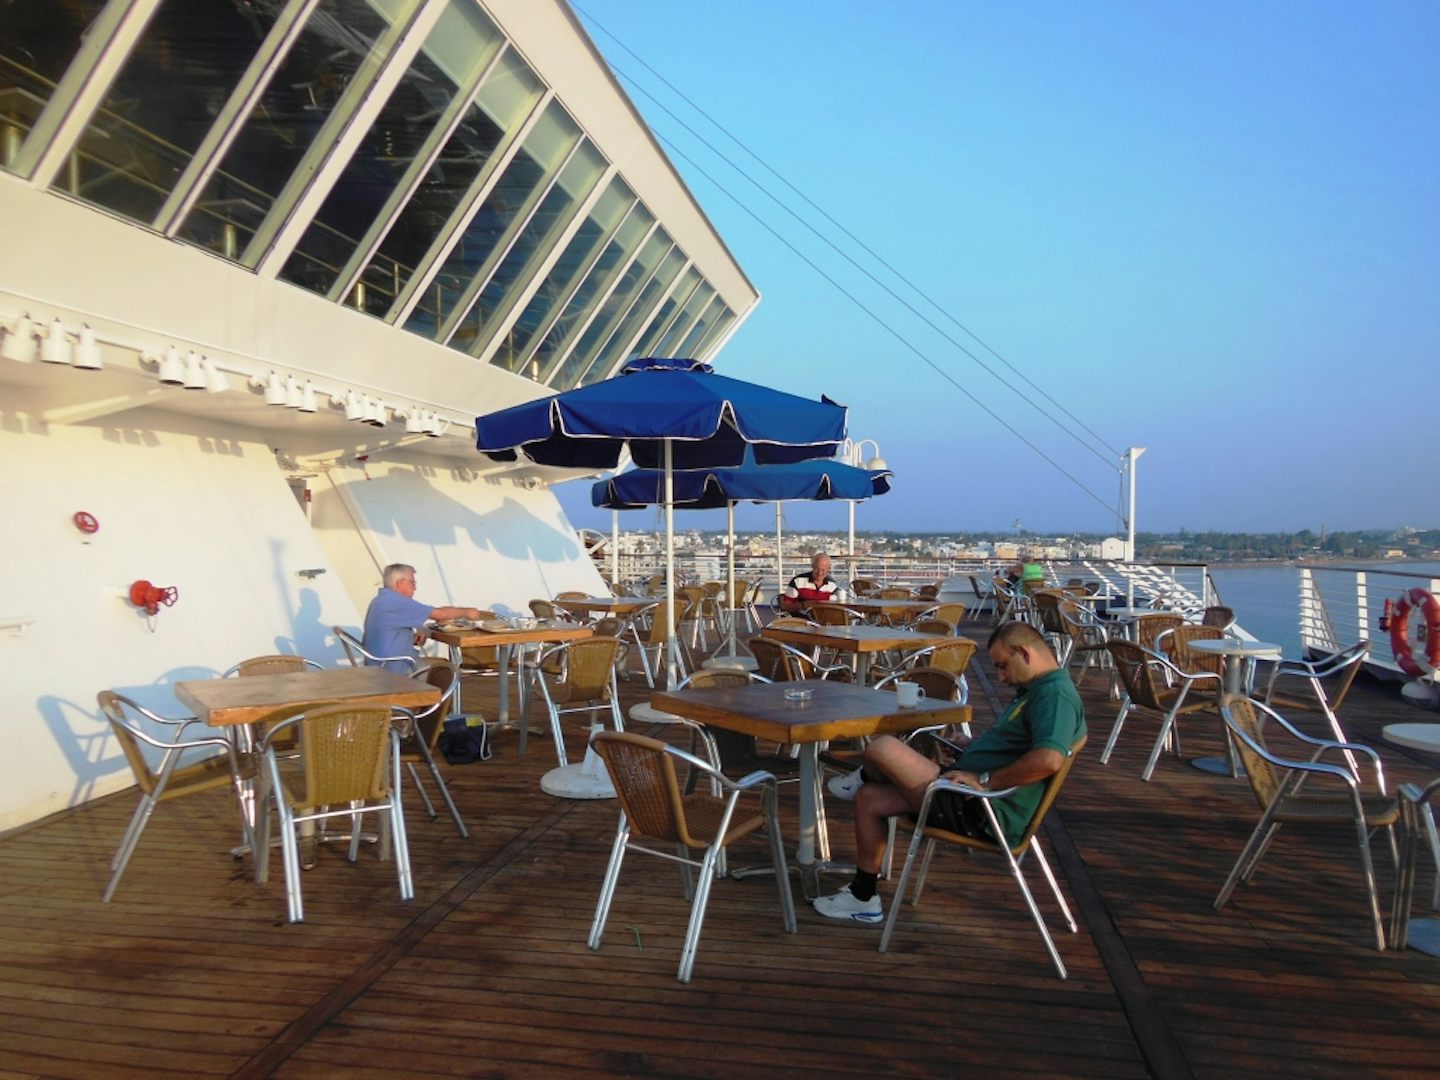 A tranquil breakfast on deck...